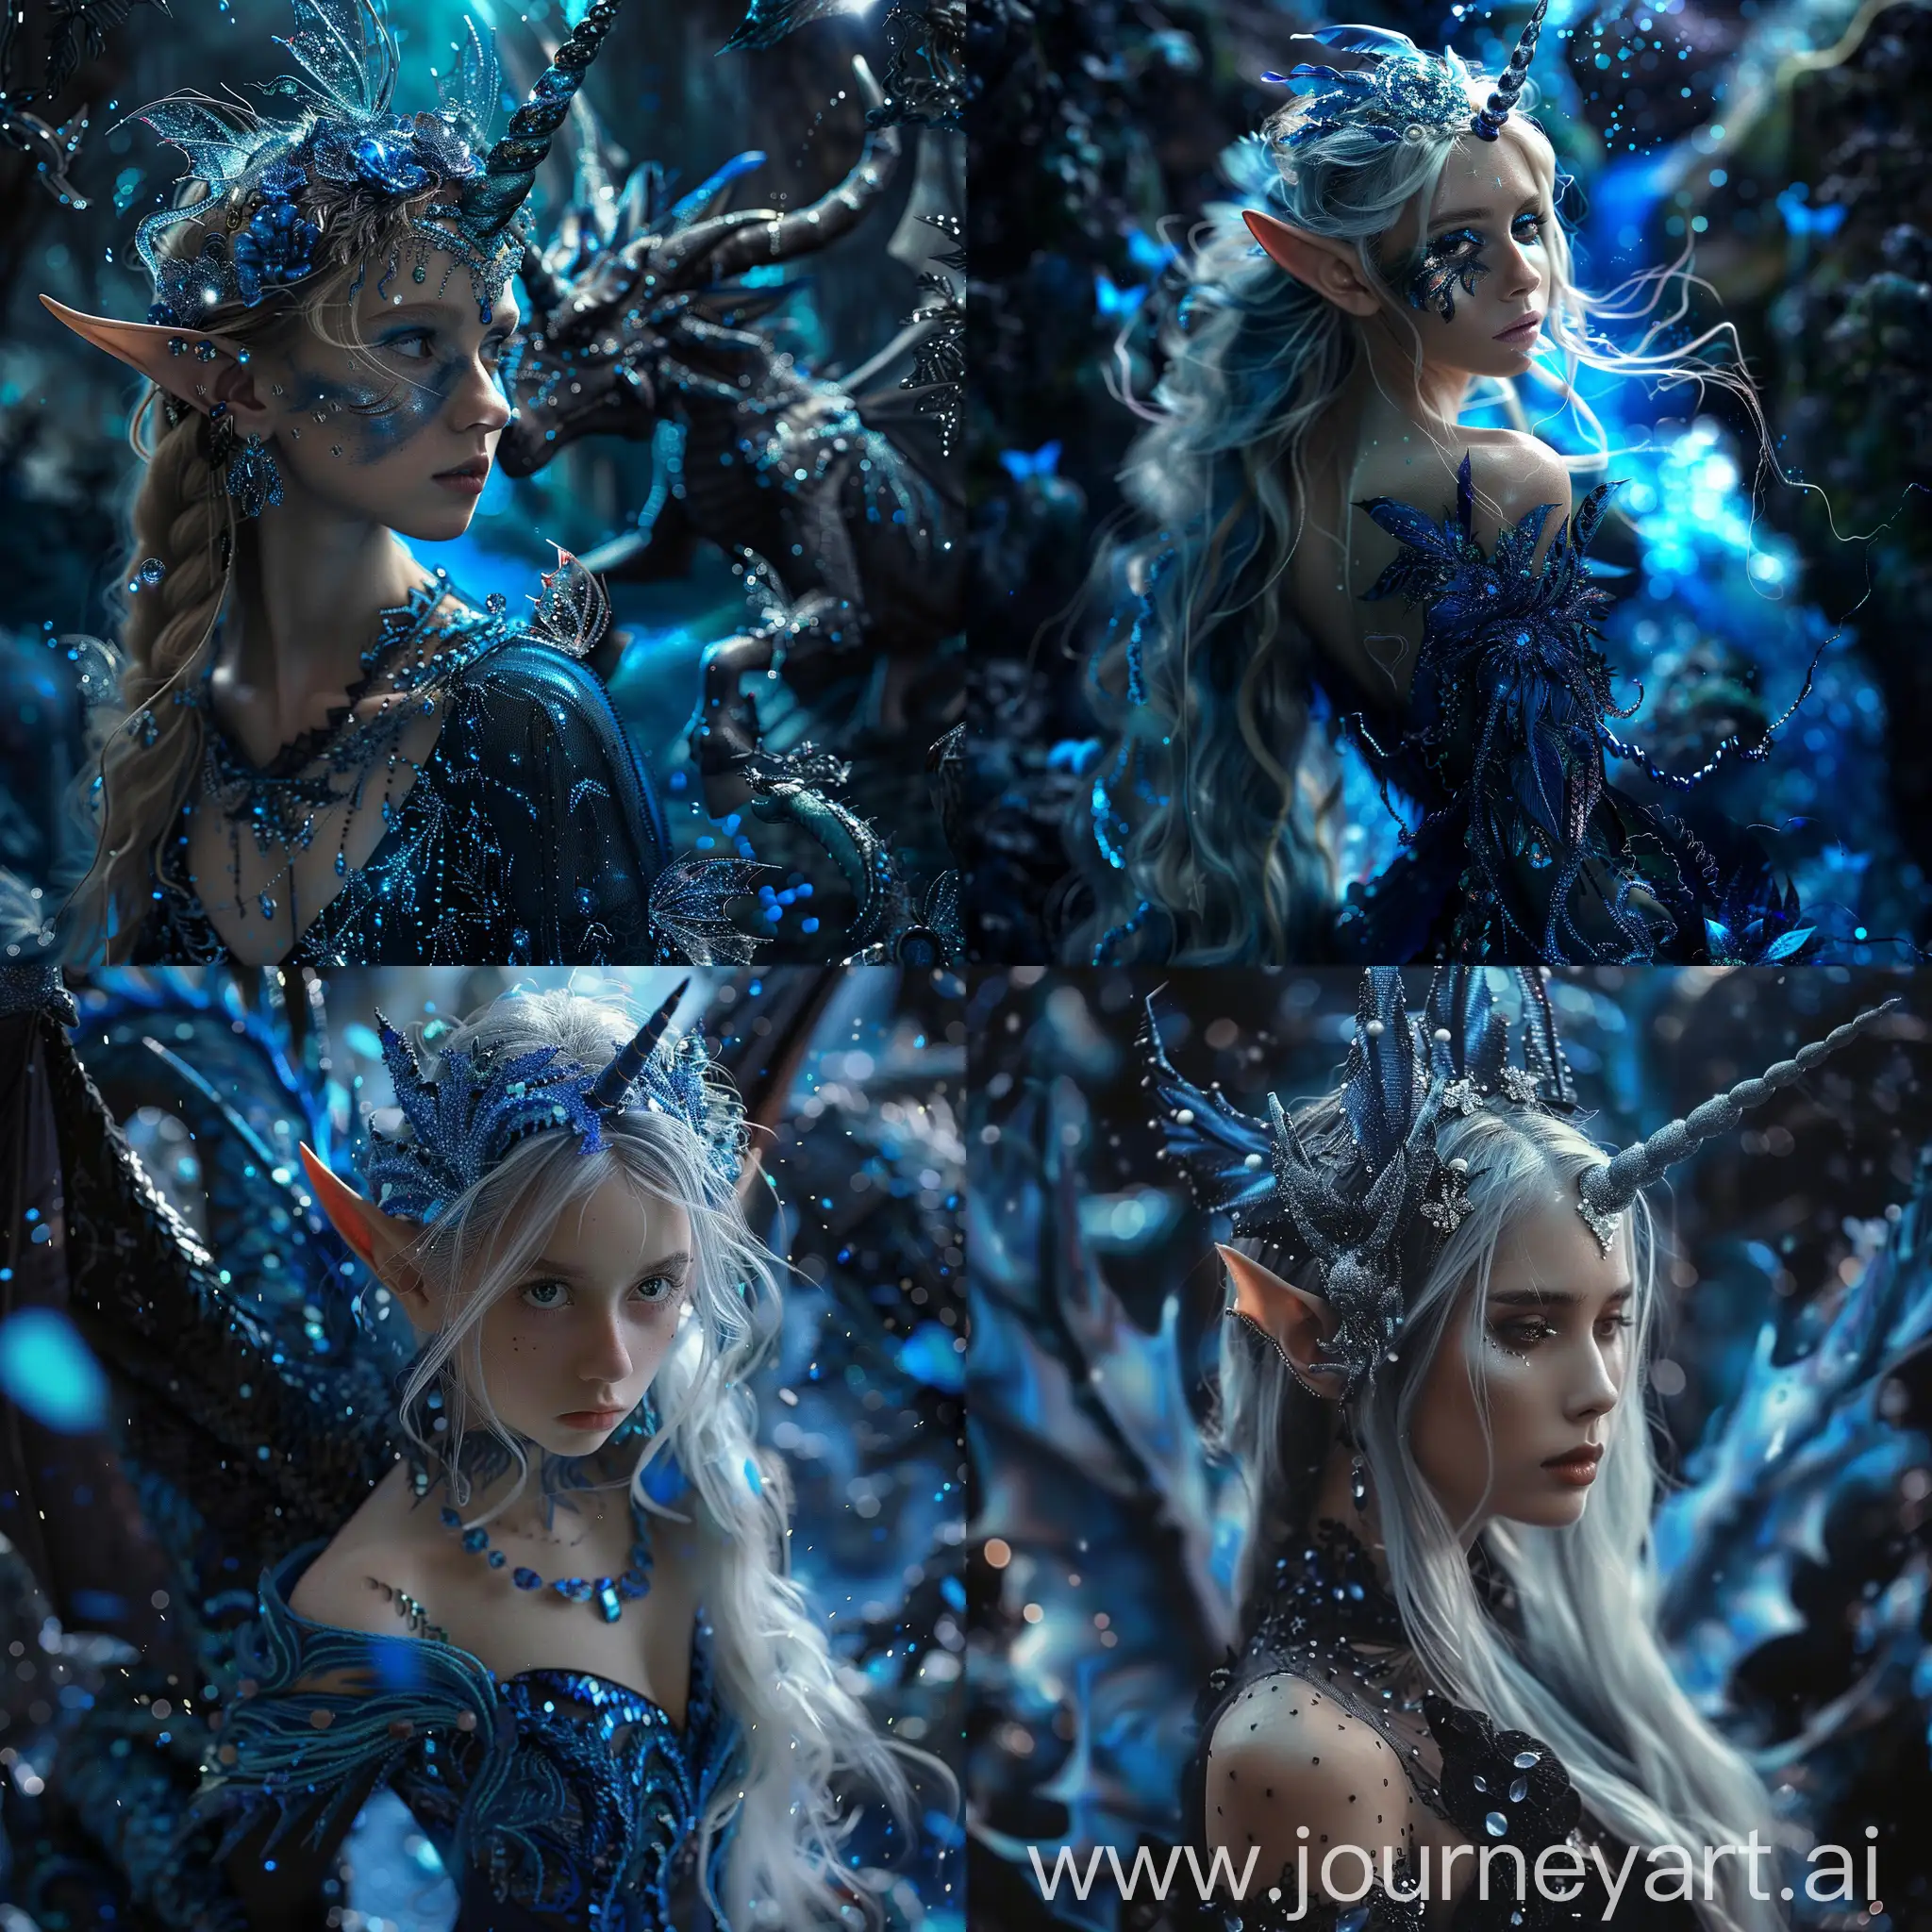 Enchanting-Elf-in-a-Shimmering-Magical-Realm-with-Dragons-and-Unicorns